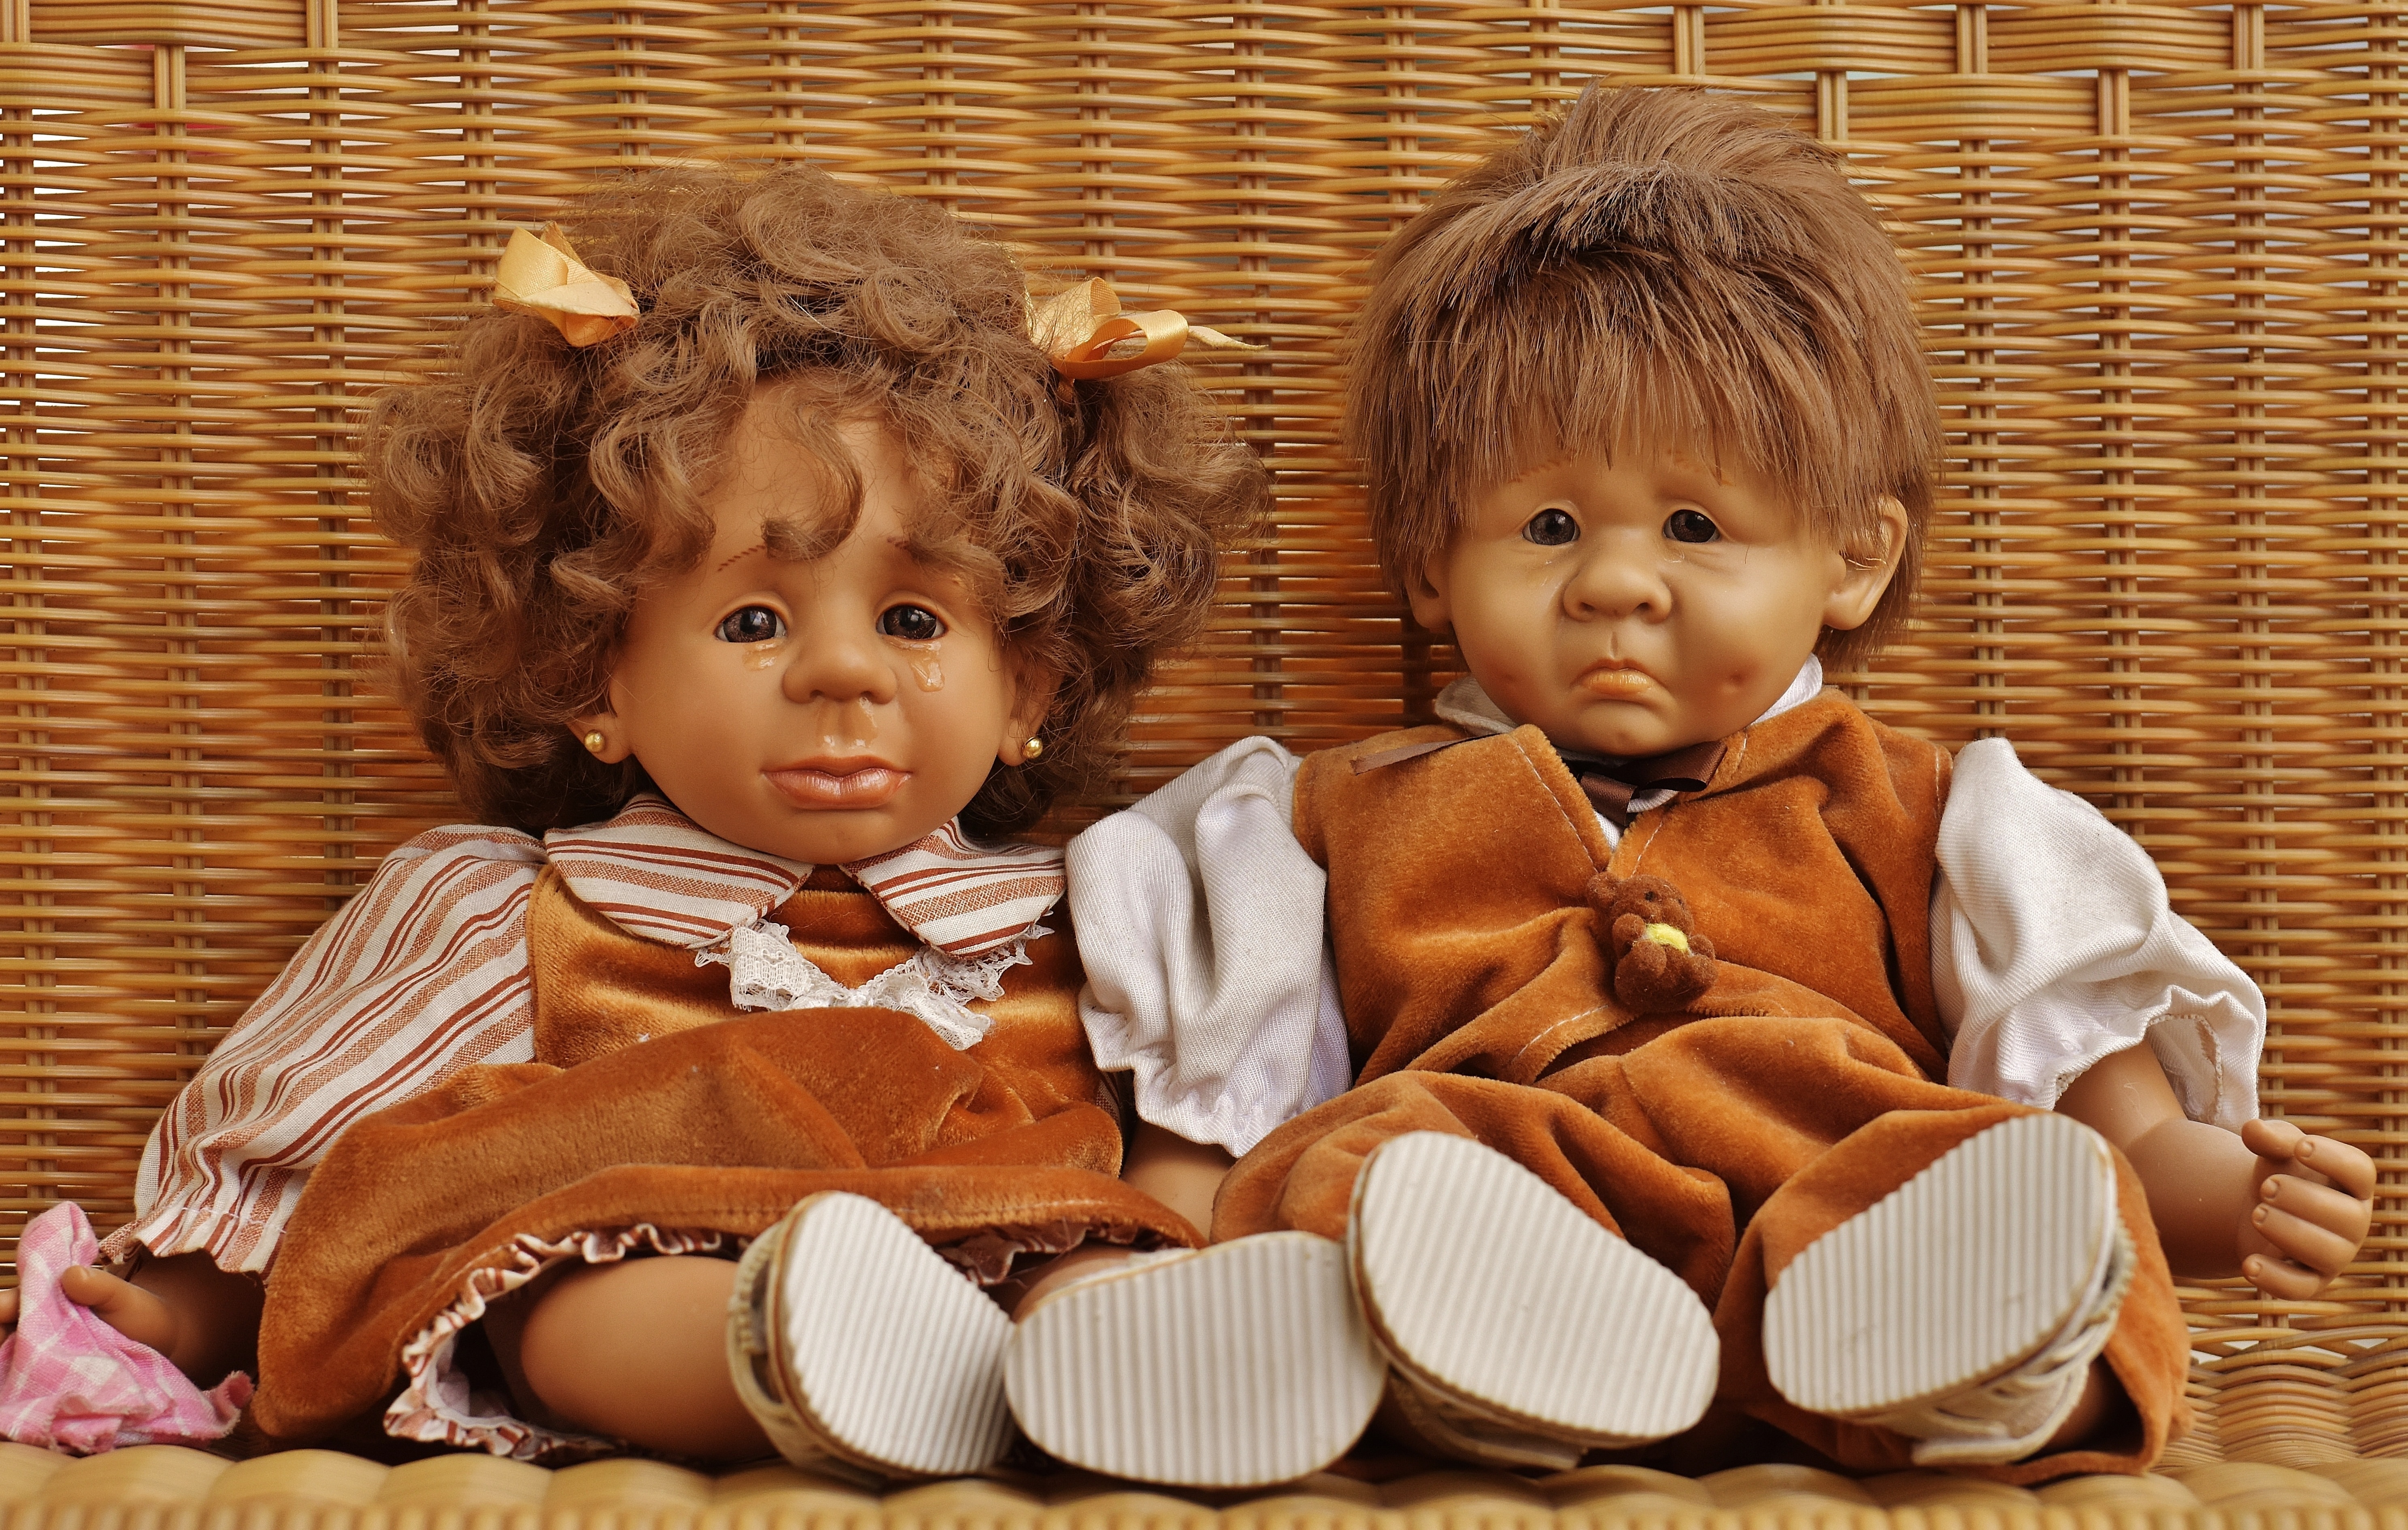 man and woman crying dolls